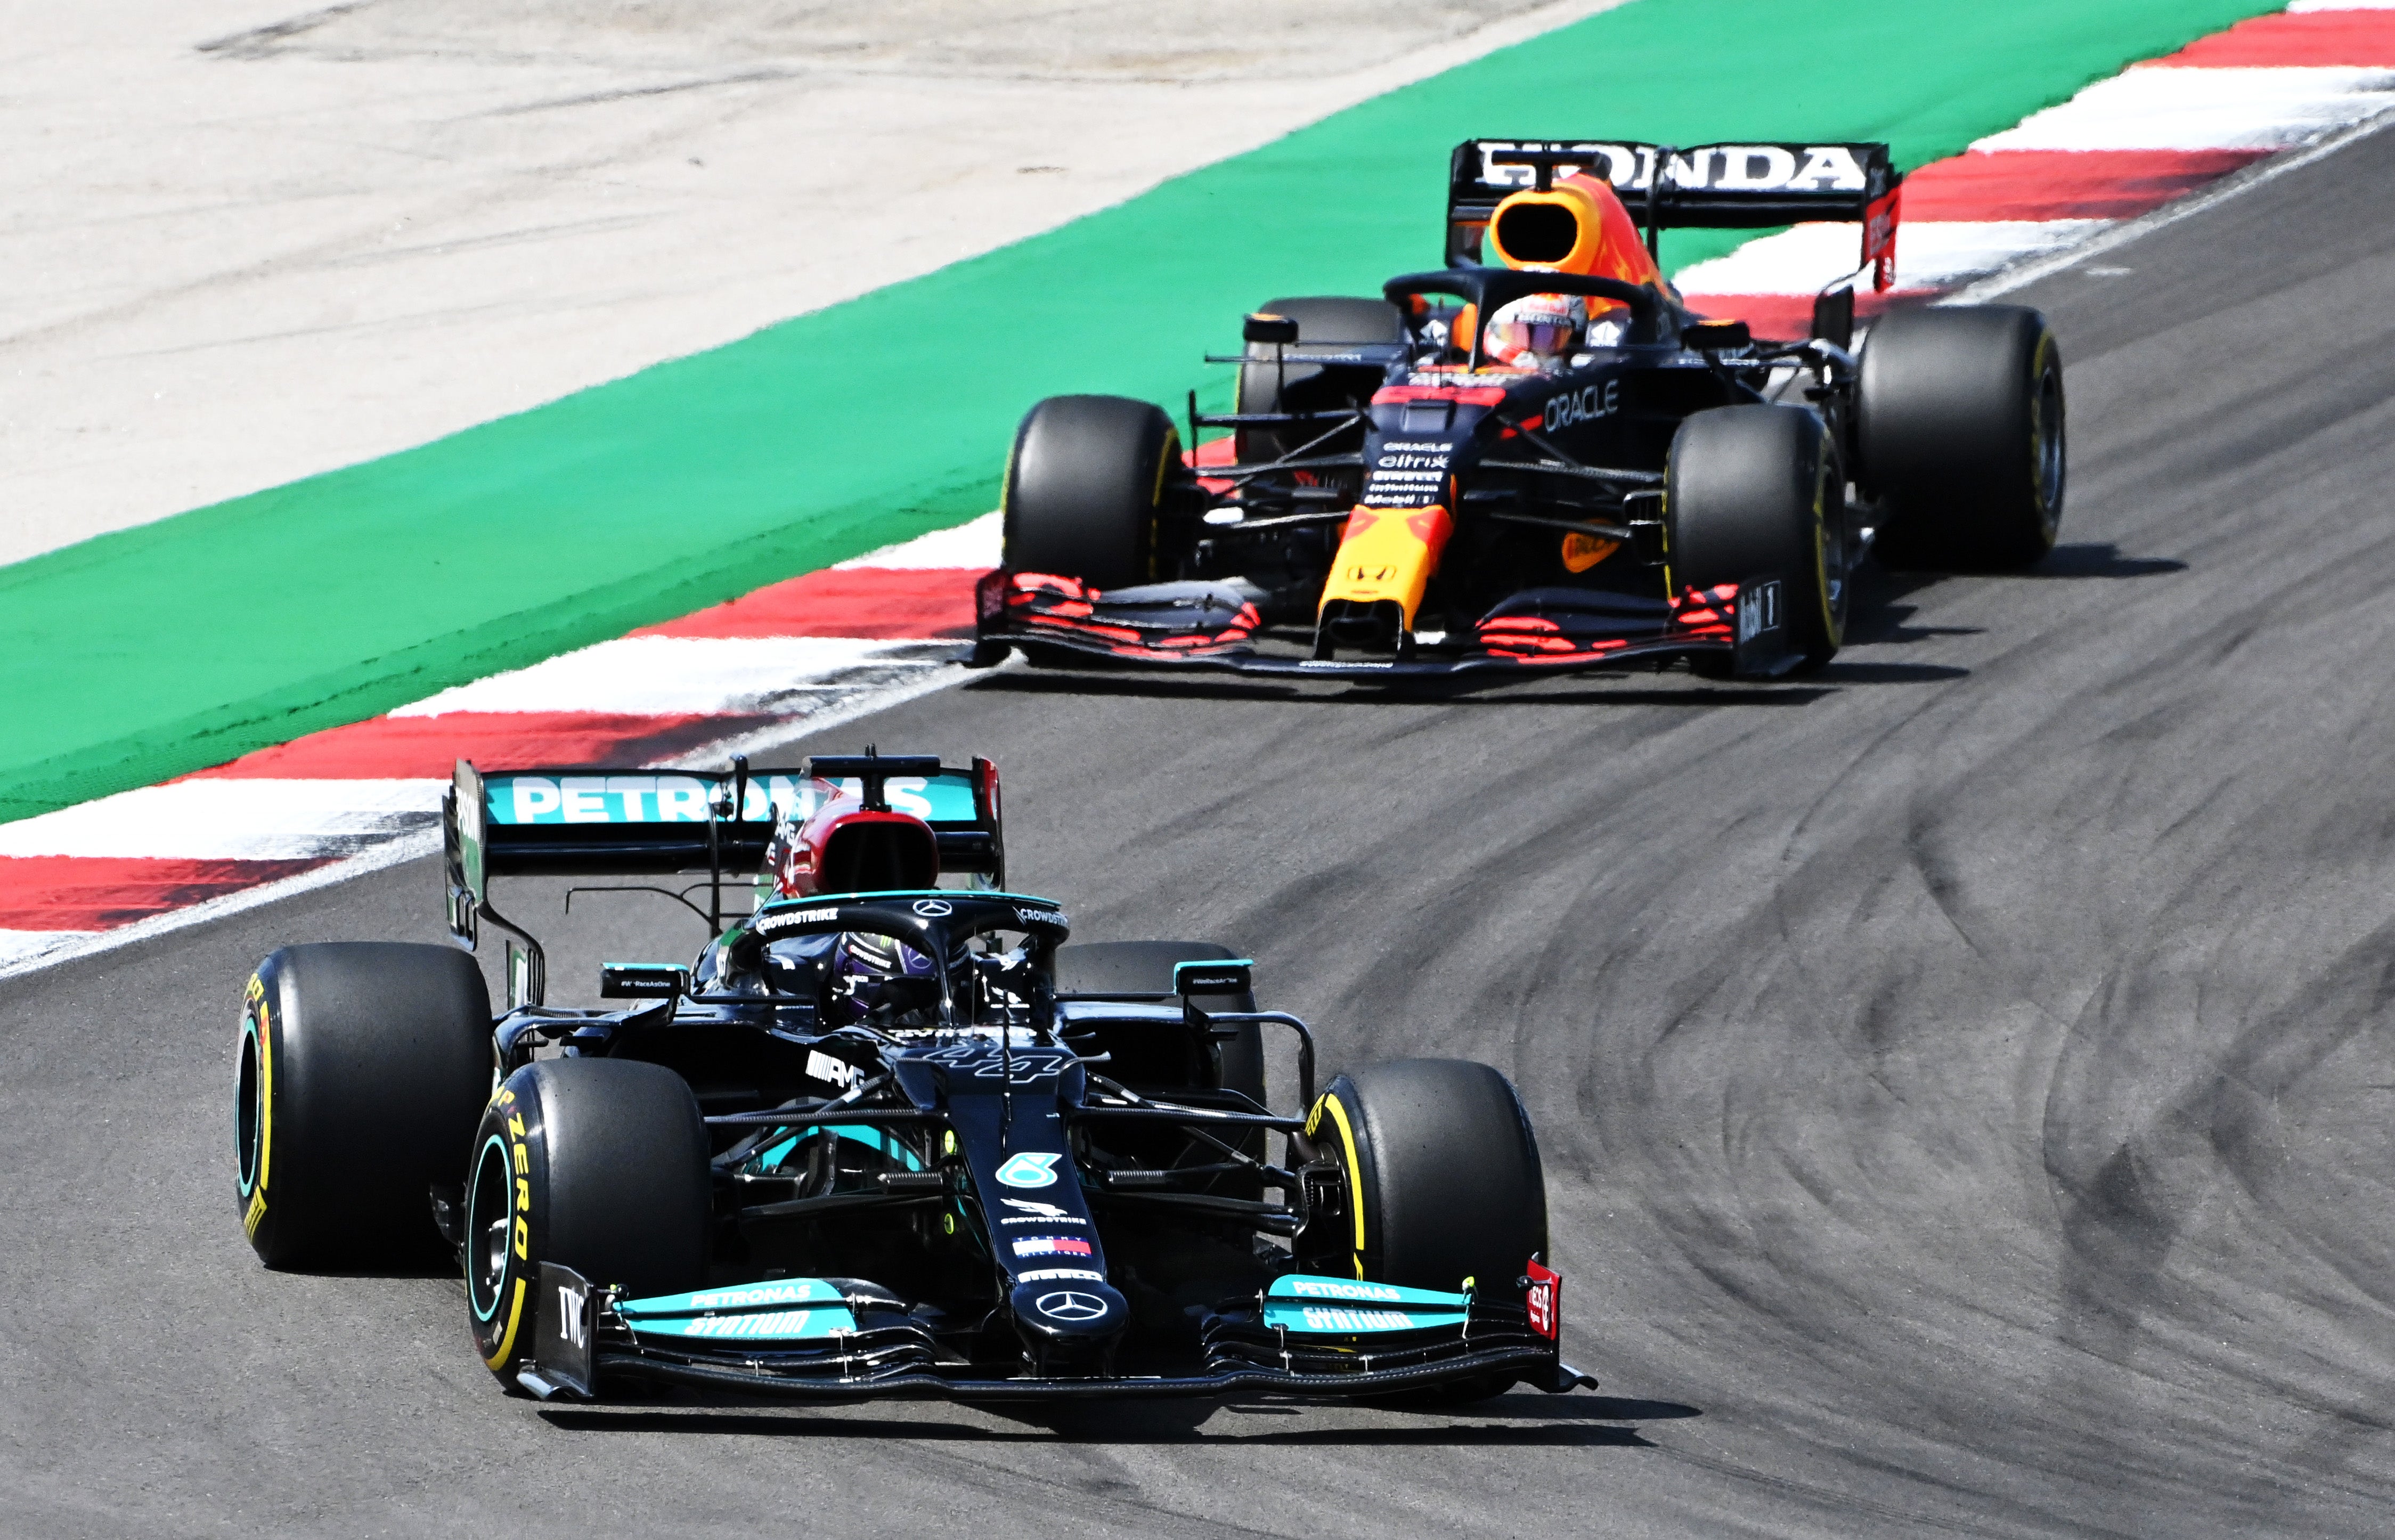 The Red Bull of Max Verstappen in pursuit of Lewis Hamilton during the Portuguese Grand Prix